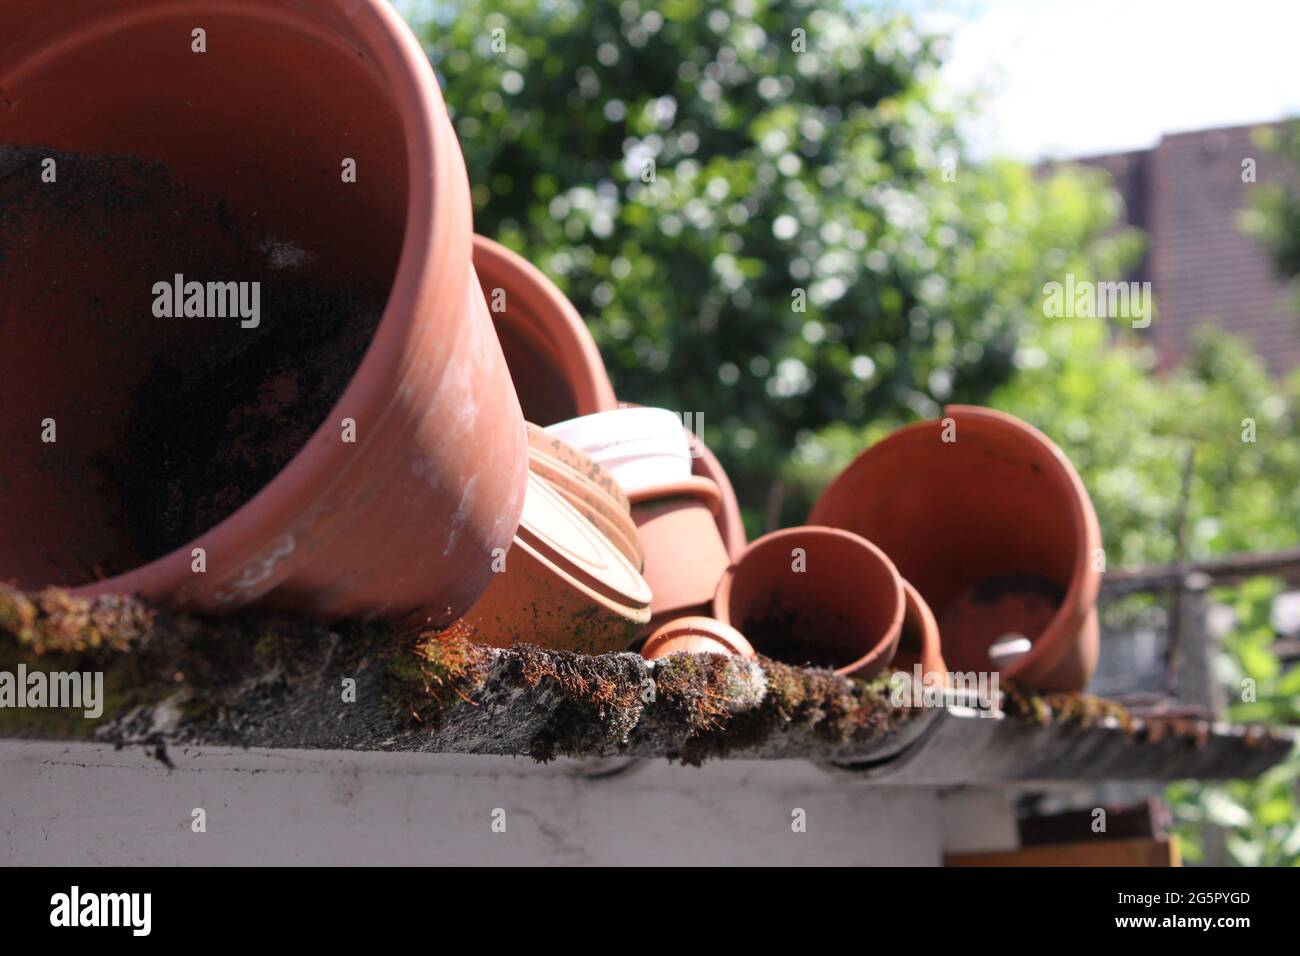 flowerpots on gardenshed roof, Germany Stock Photo